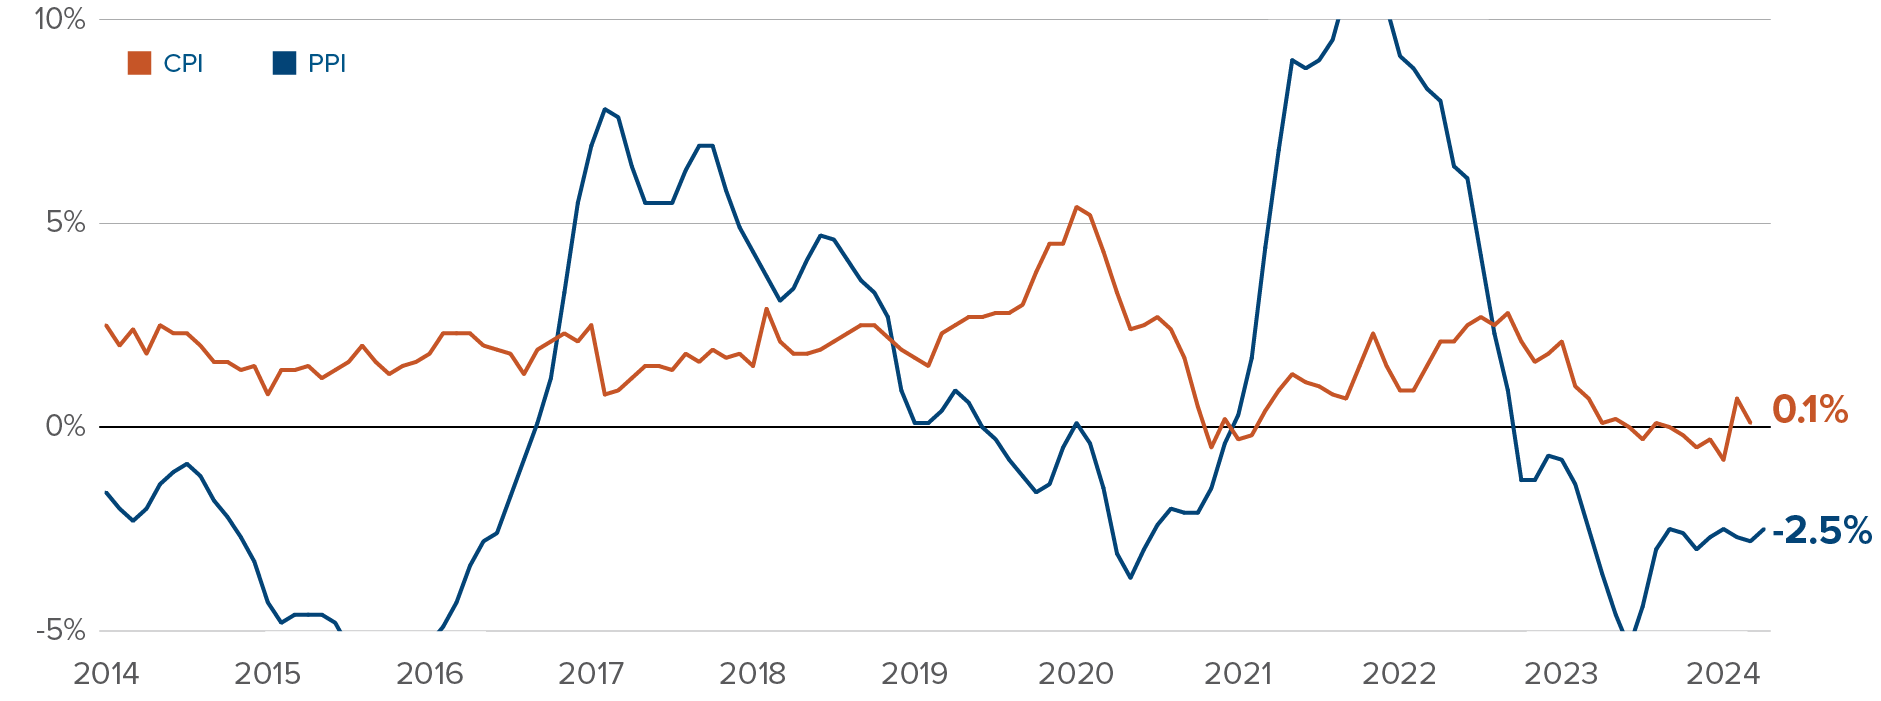 As at April 30, China’s PPI growth was -2.5% and has been negative since October 2022. CPI growth was 0.1%. 